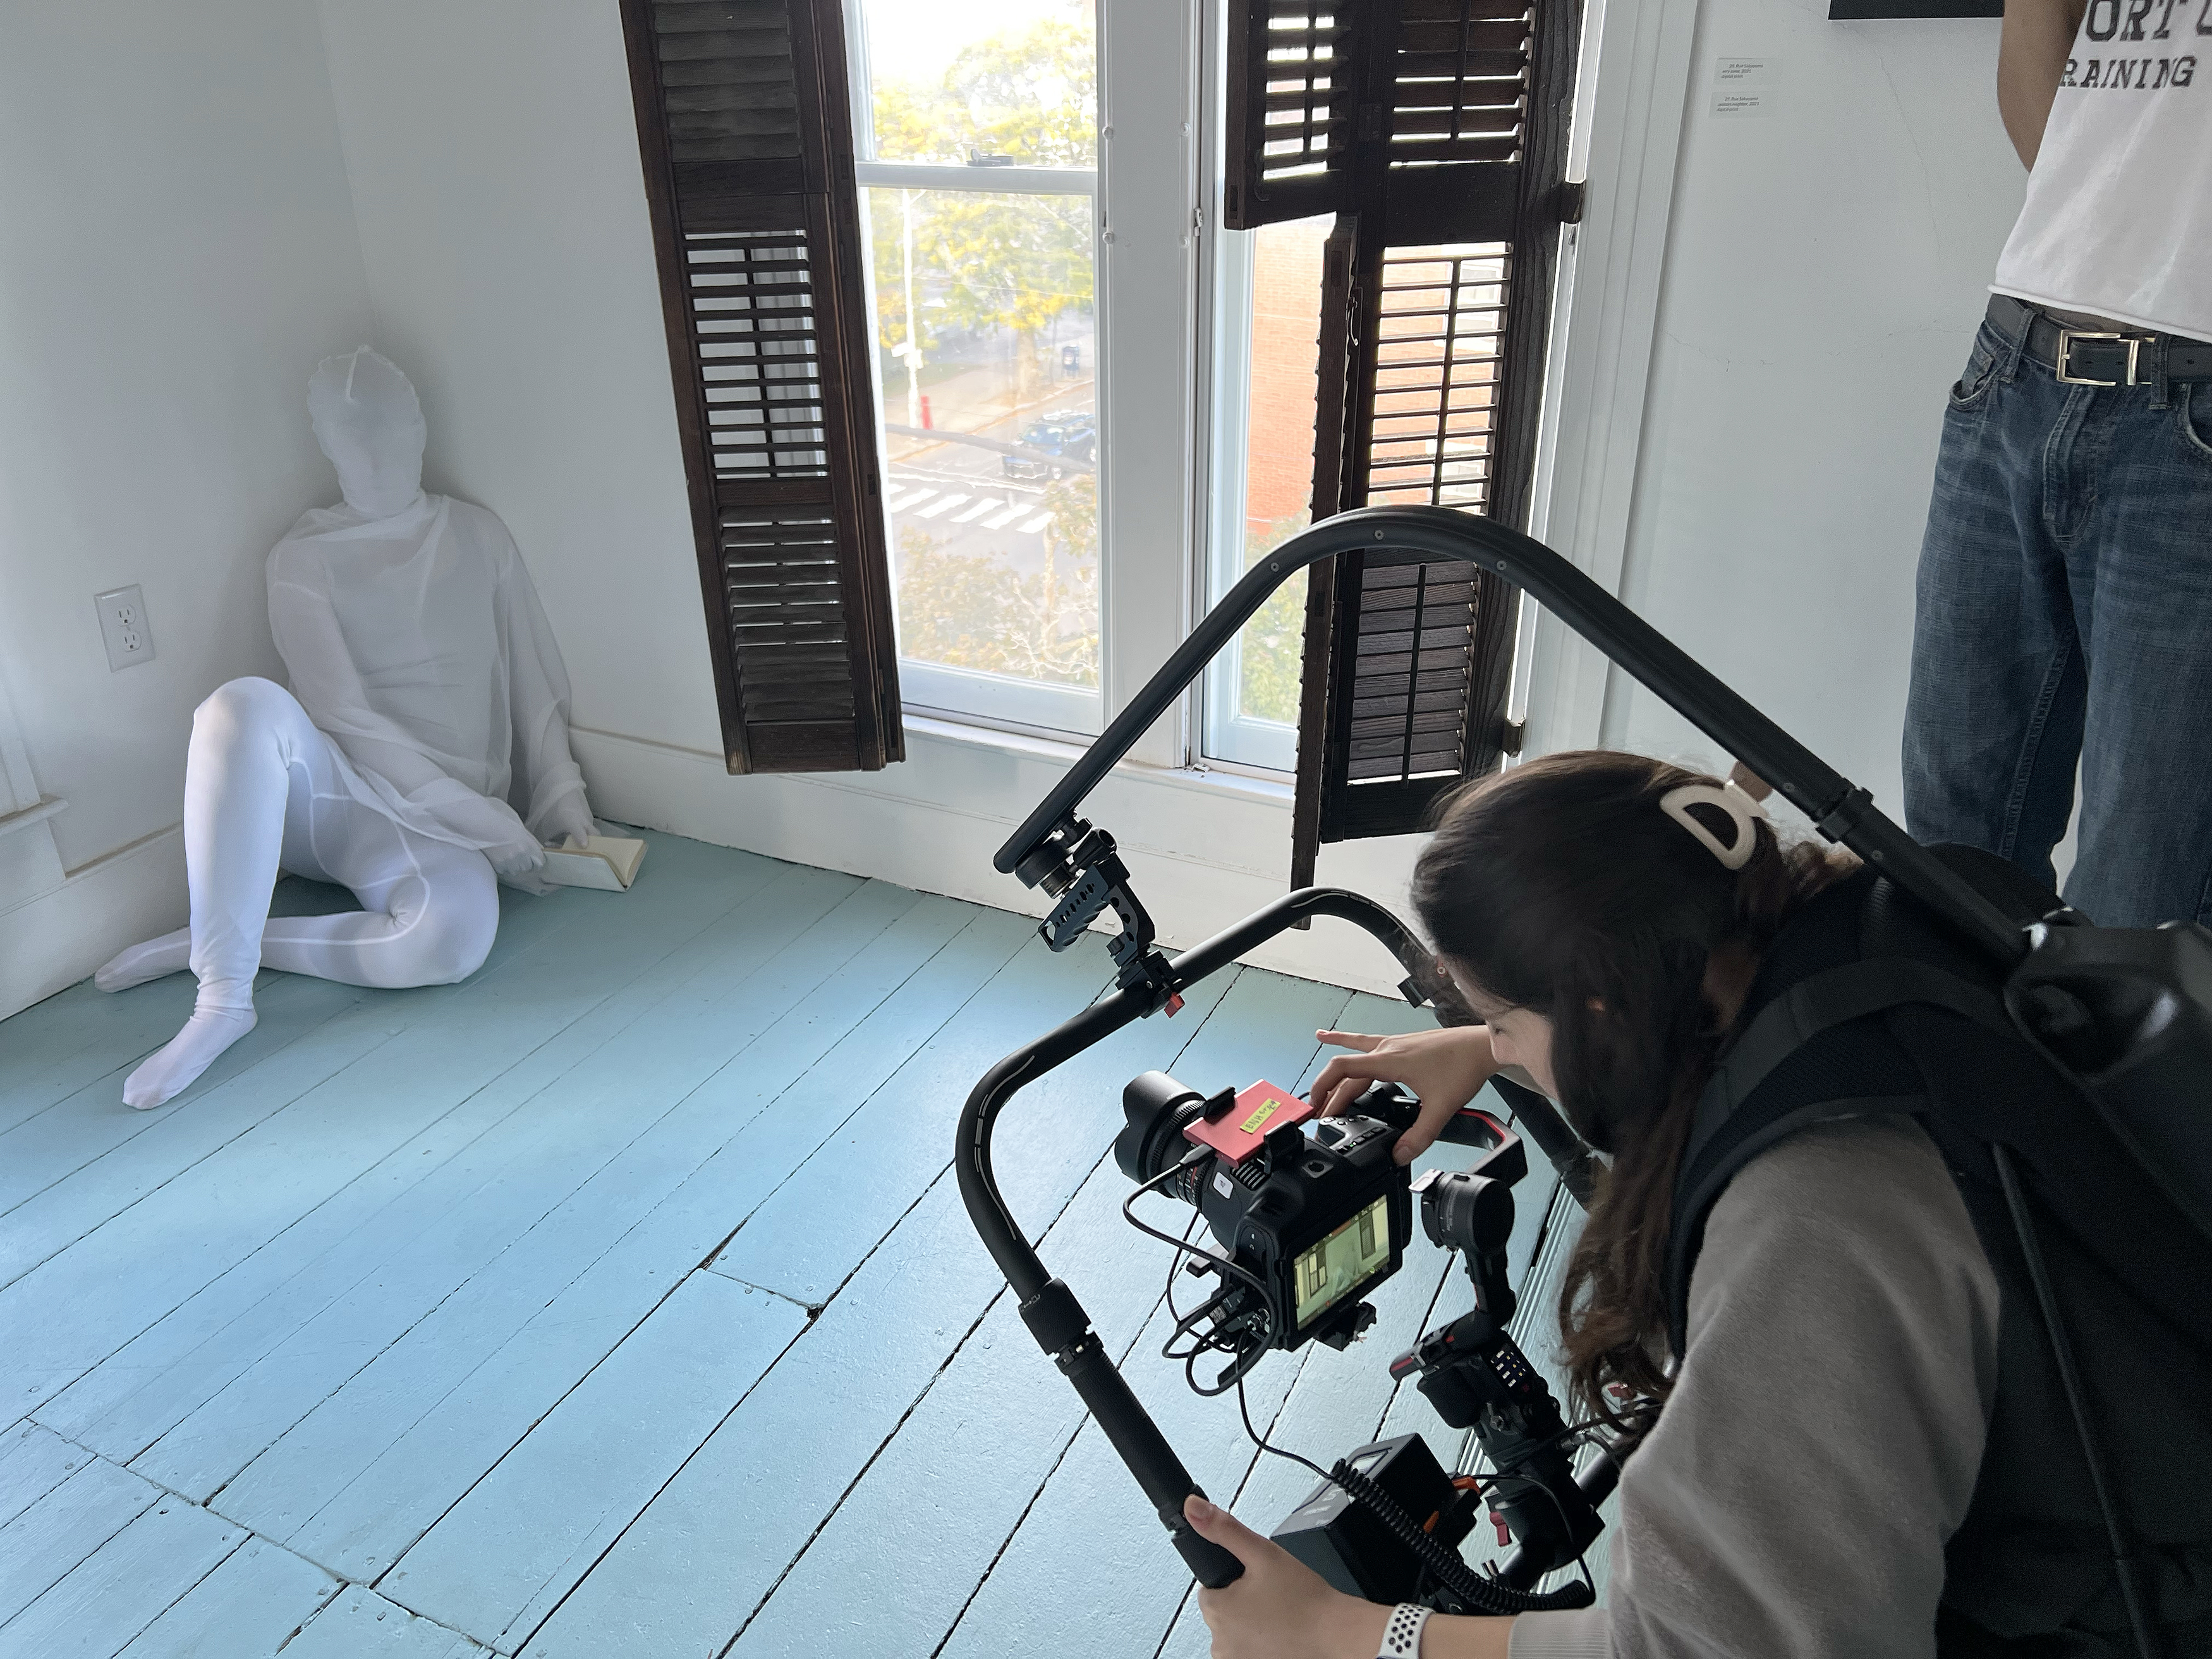 an actor dressed as a ghost is filmed in the corner of the attic